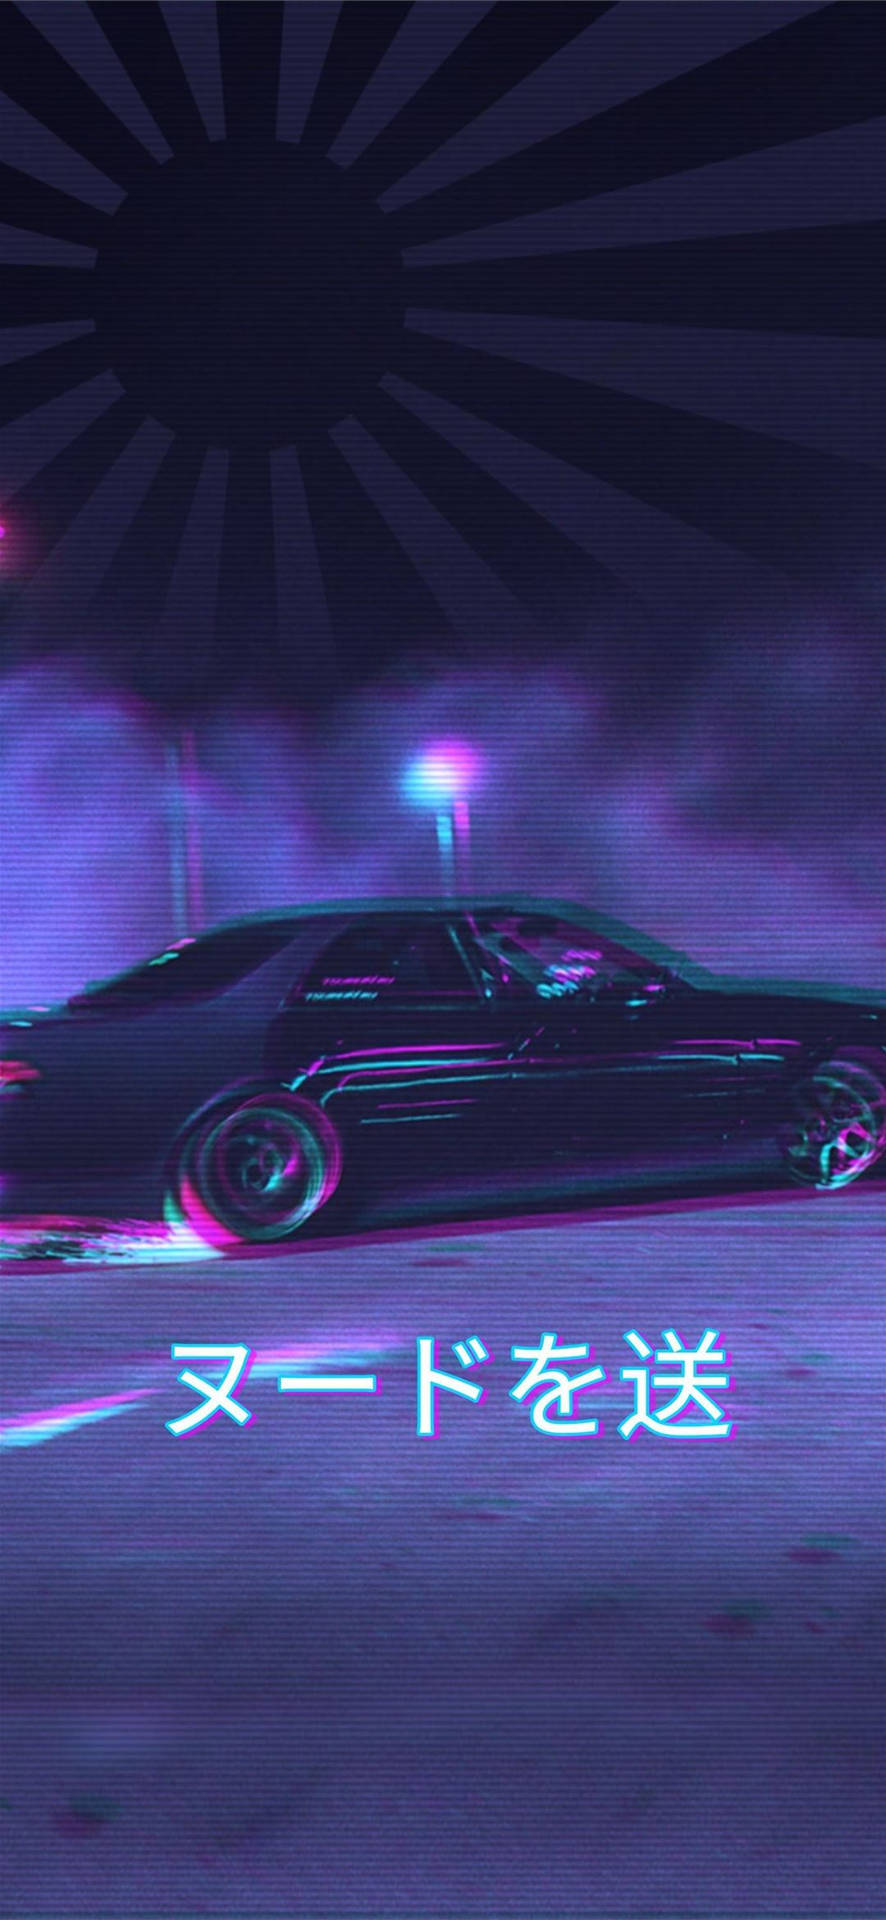 Classic Jdm Aesthetic With Flag Background